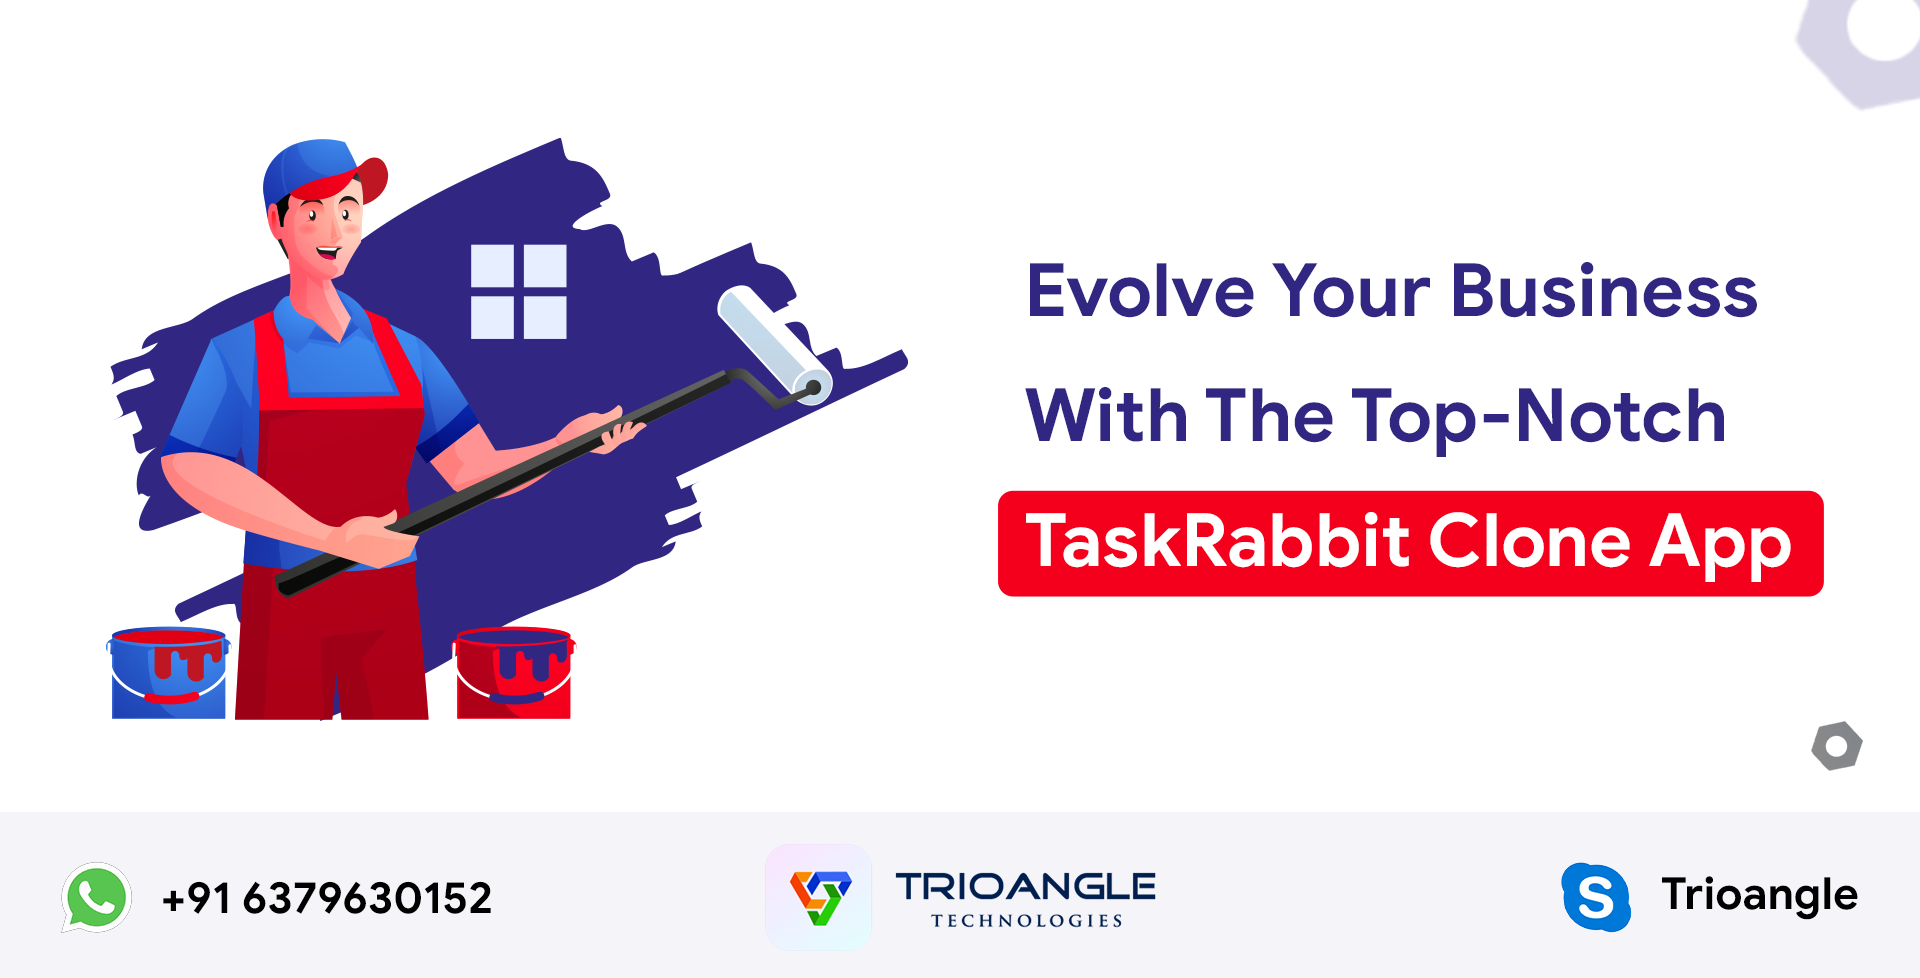 Article about Evolve Your Business With The Top-Notch TaskRabbit Clone App